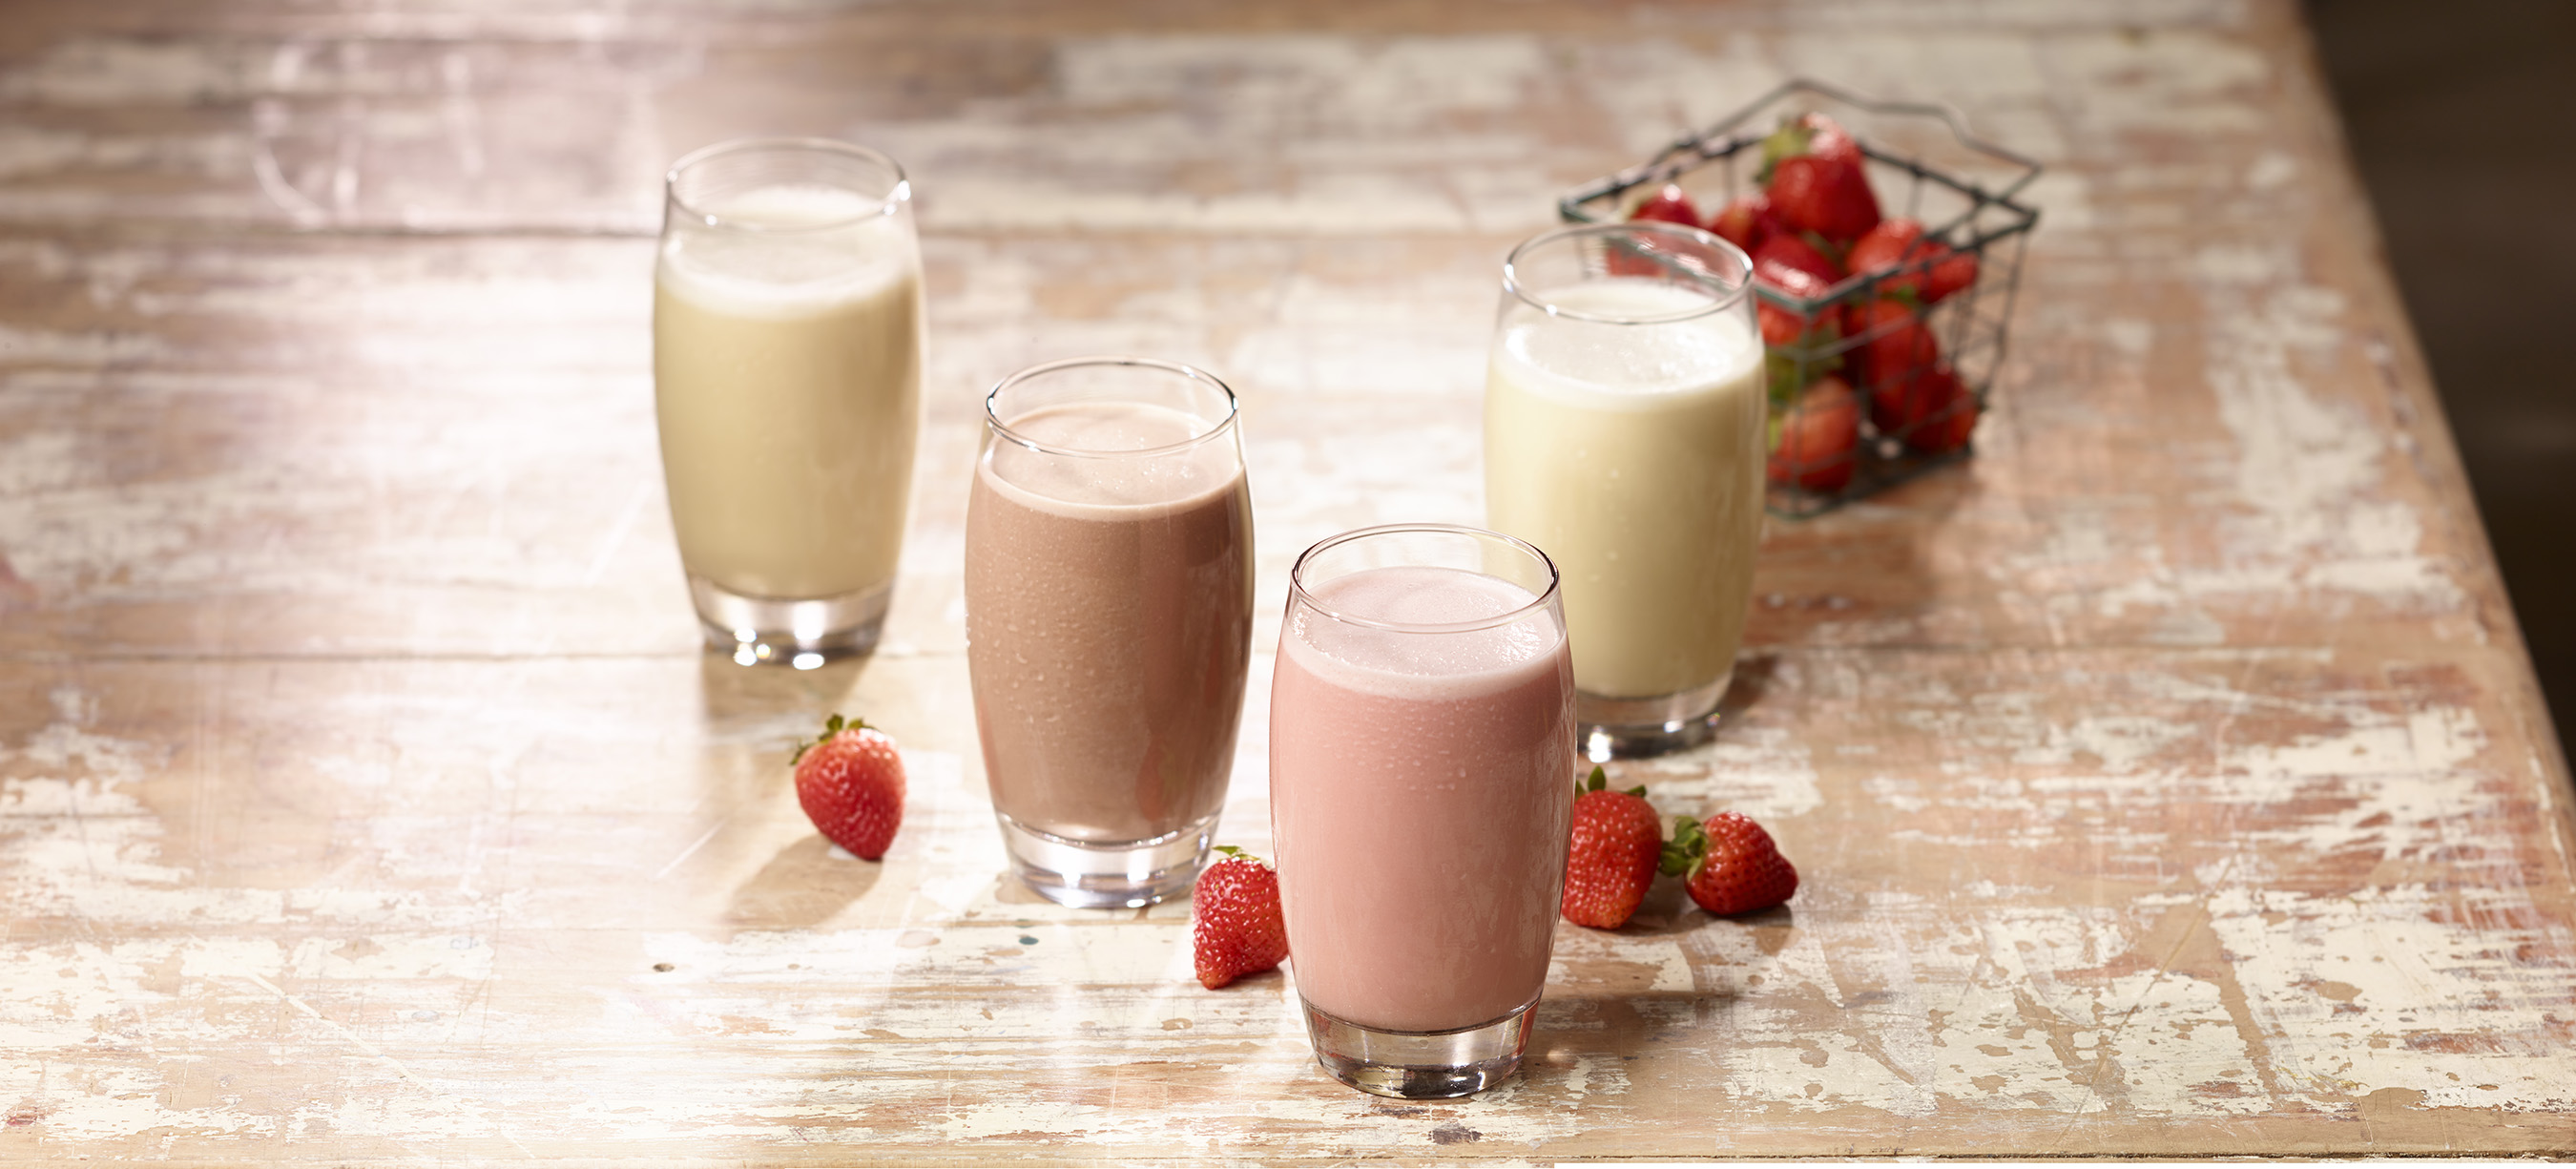 BodyKey™ Replacement Shakes are available in four flavors: French Vanilla, Dutch Chocolate, Strawberry Cream and Cinnamon Swirl